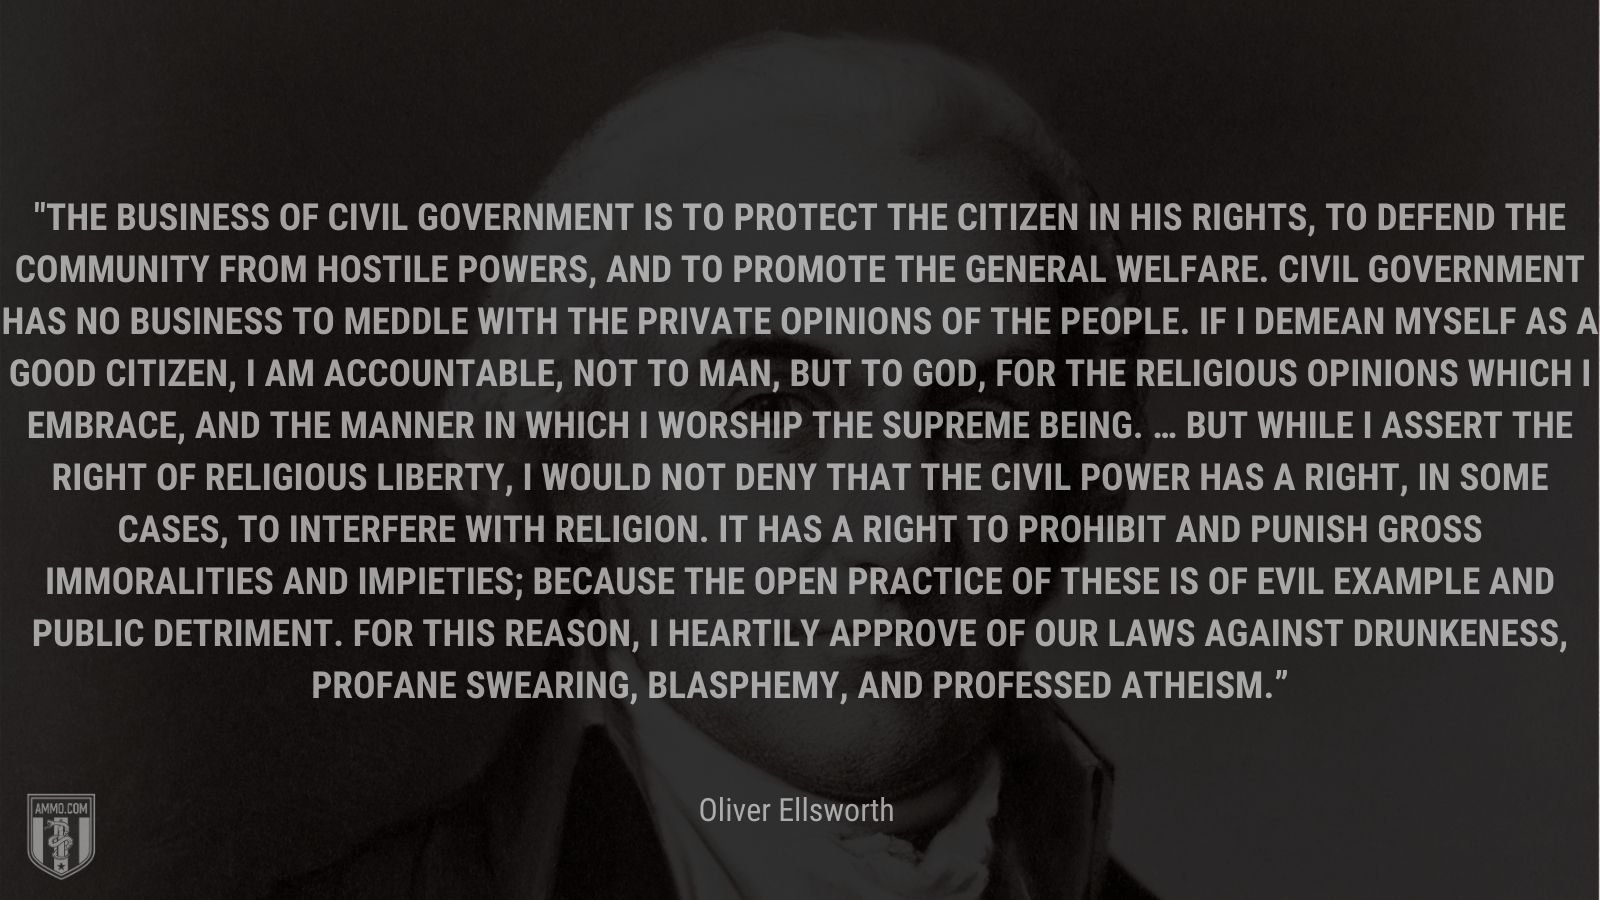 “ The business of civil government is to protect the citizen in his rights, to defend the community from hostile powers, and to promote the general welfare. Civil government has no business to meddle with the private opinions of the people. If I demean myself as a good citizen, I am accountable, not to man, but to God, for the religious opinions which I embrace, and the manner in which I worship the supreme being. … But while I assert the right of religious liberty, I would not deny that the civil power has a right, in some cases, to interfere with religion. It has a right to prohibit and punish gross immoralities and impieties; because the open practice of these is of evil example and public detriment. For this reason, I heartily approve of our laws against drunkeness, profane swearing, blasphemy, and professed atheism.” - Oliver Ellsworth